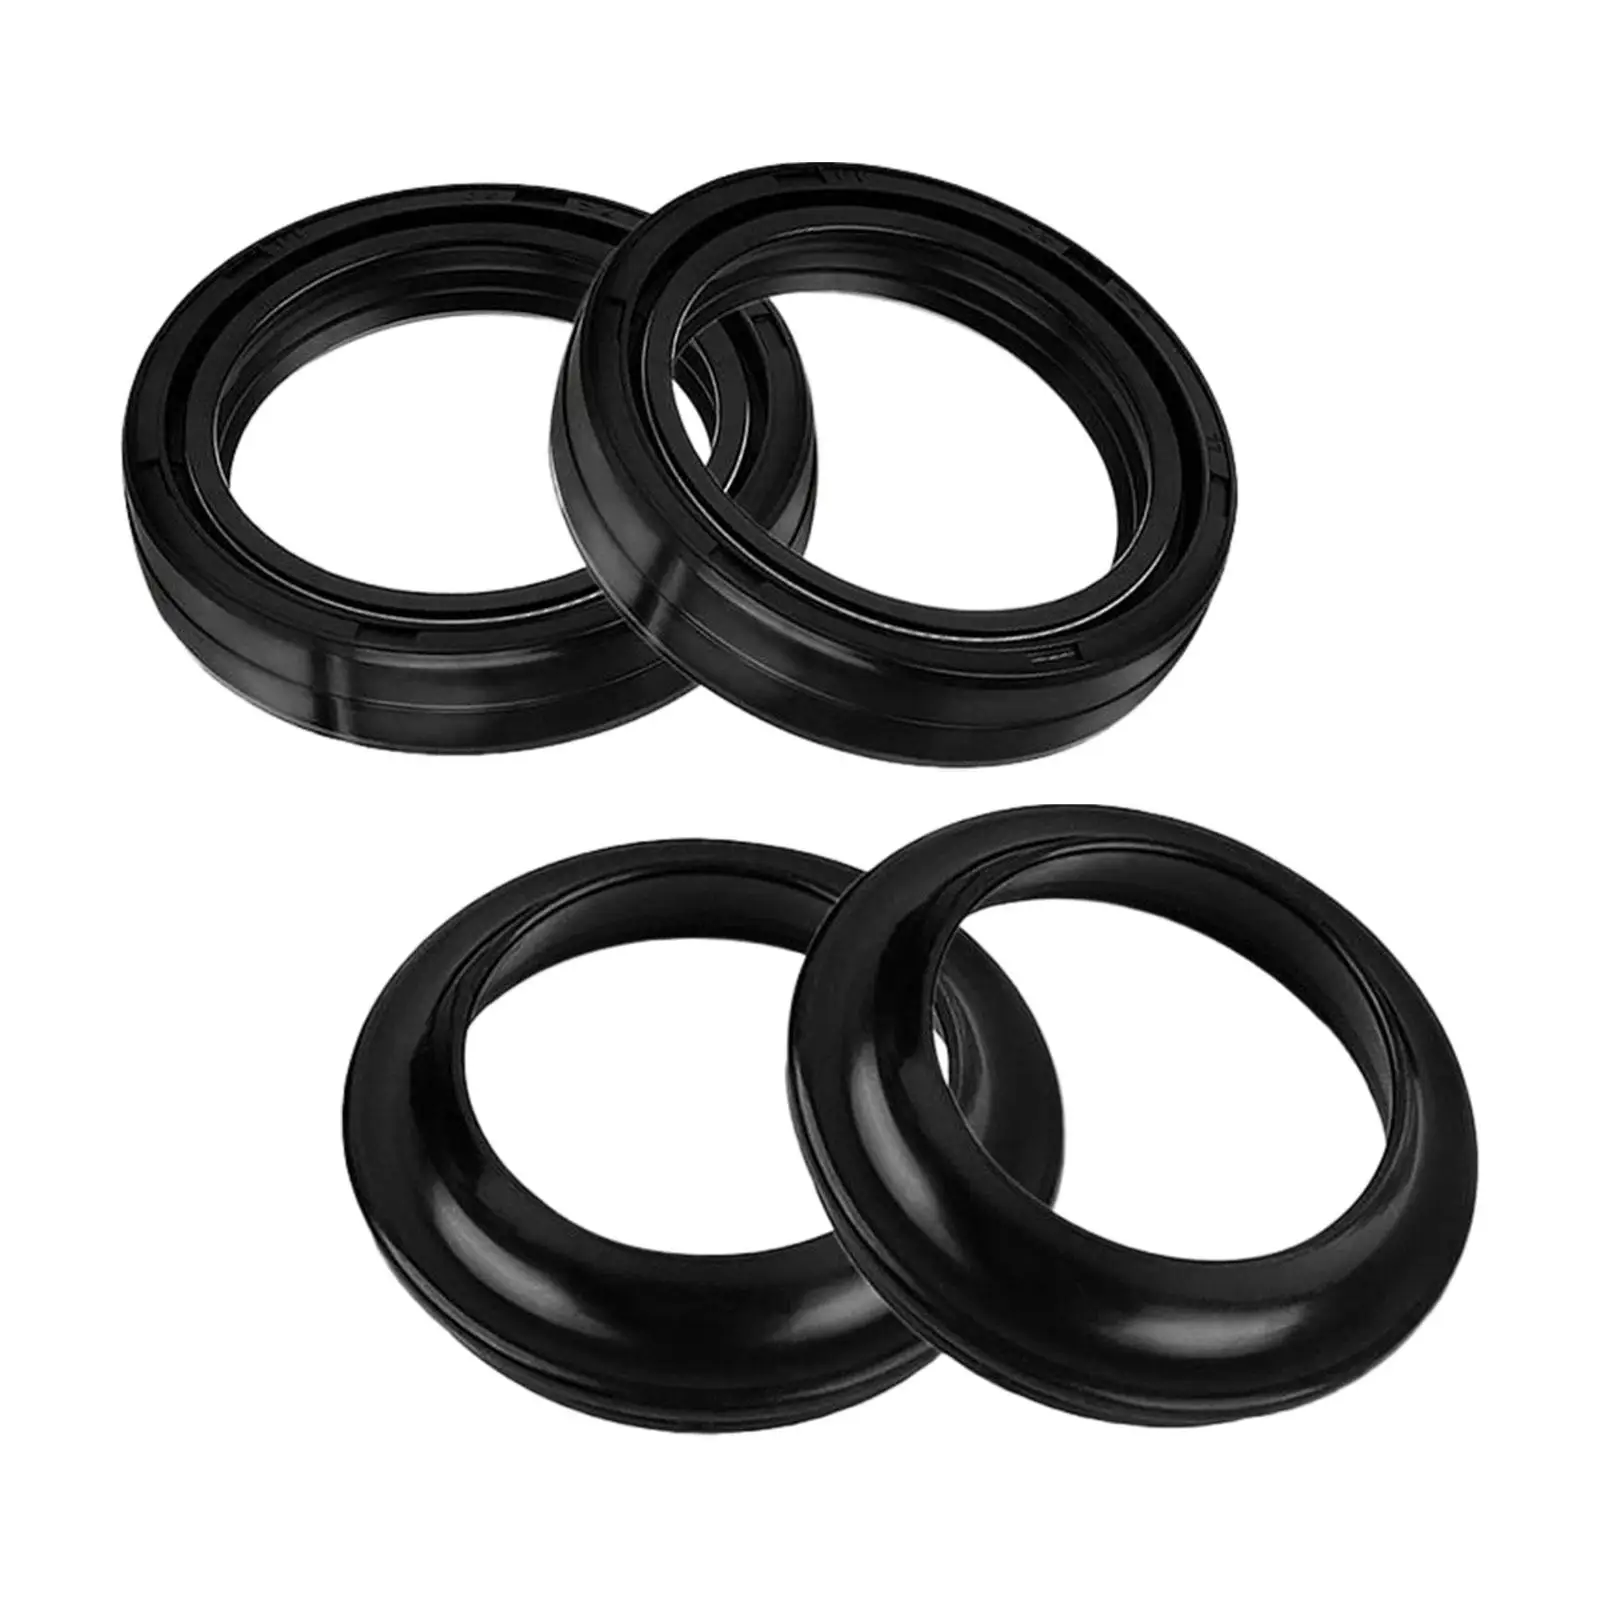 4 Pieces 39x52x11mm Rubber Front Fork Oil Seal & Dust Cover Oil Resistance for